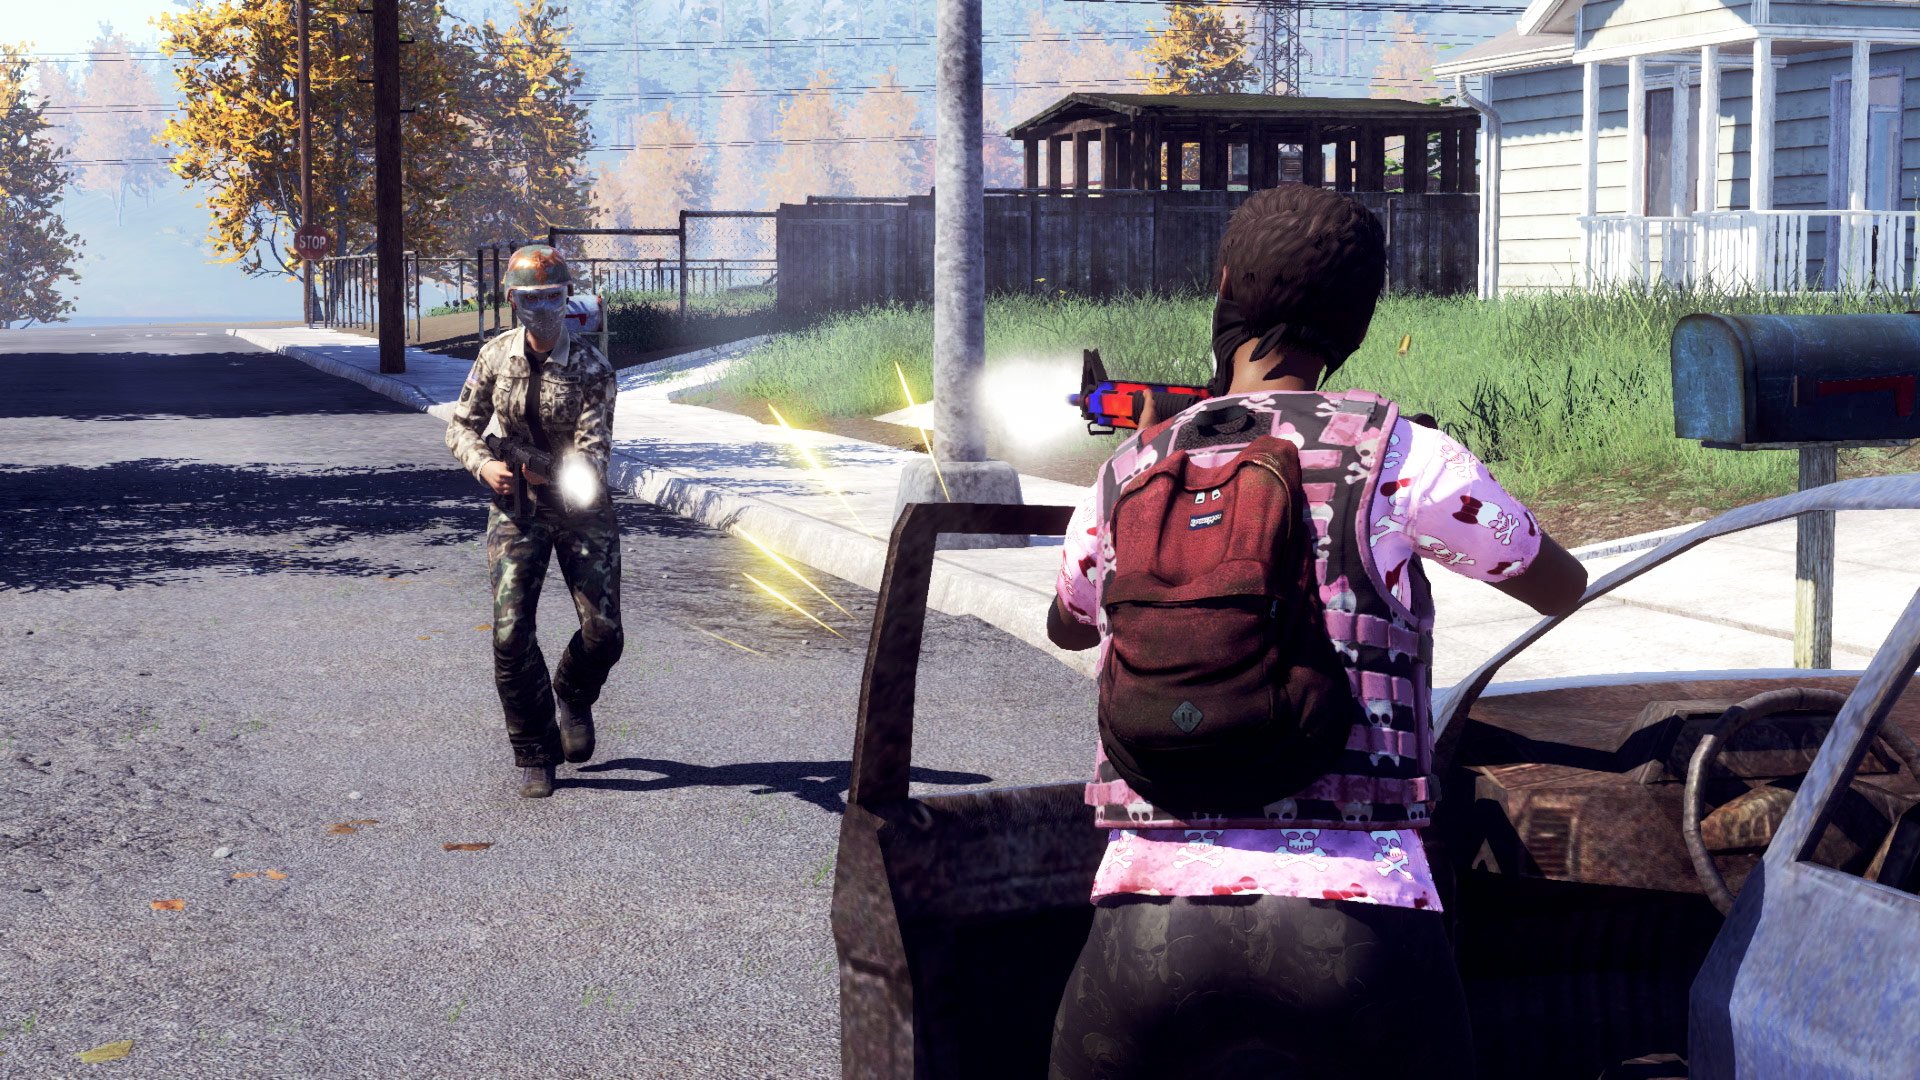 H1Z1: King of the Kill delayed for